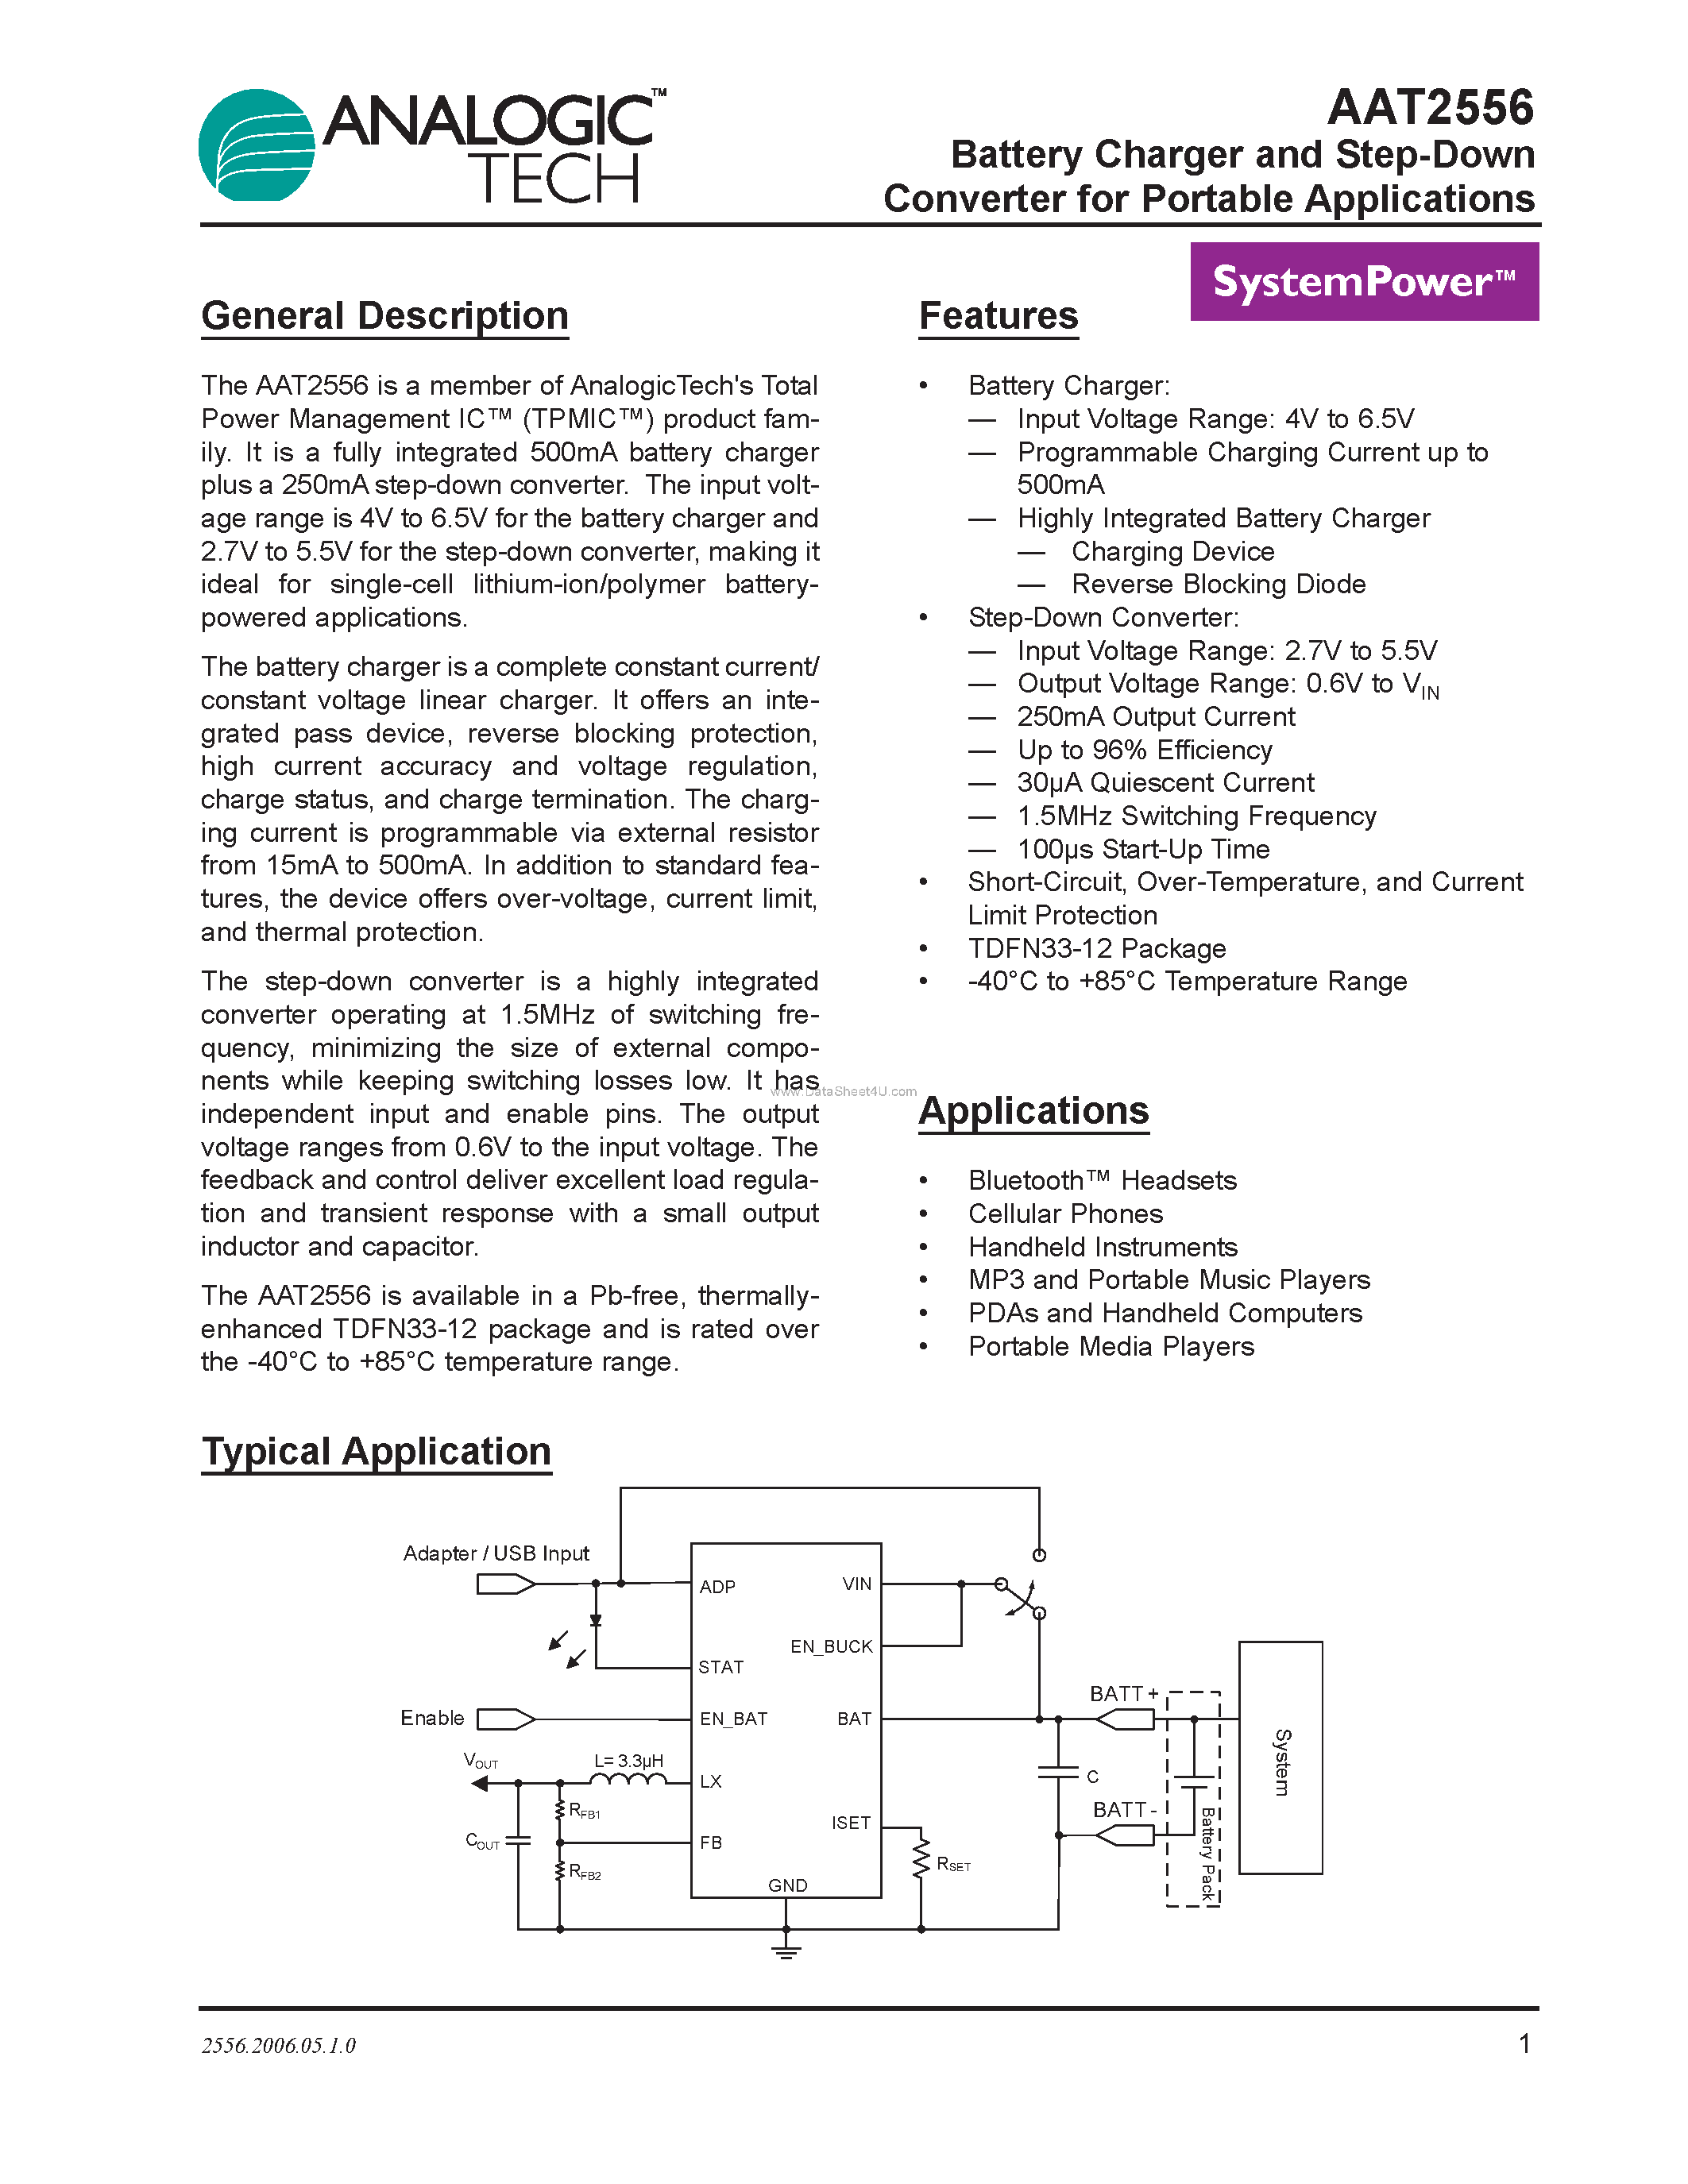 Datasheet AAT2556 - Battery Charger and Step-Down Converter page 1